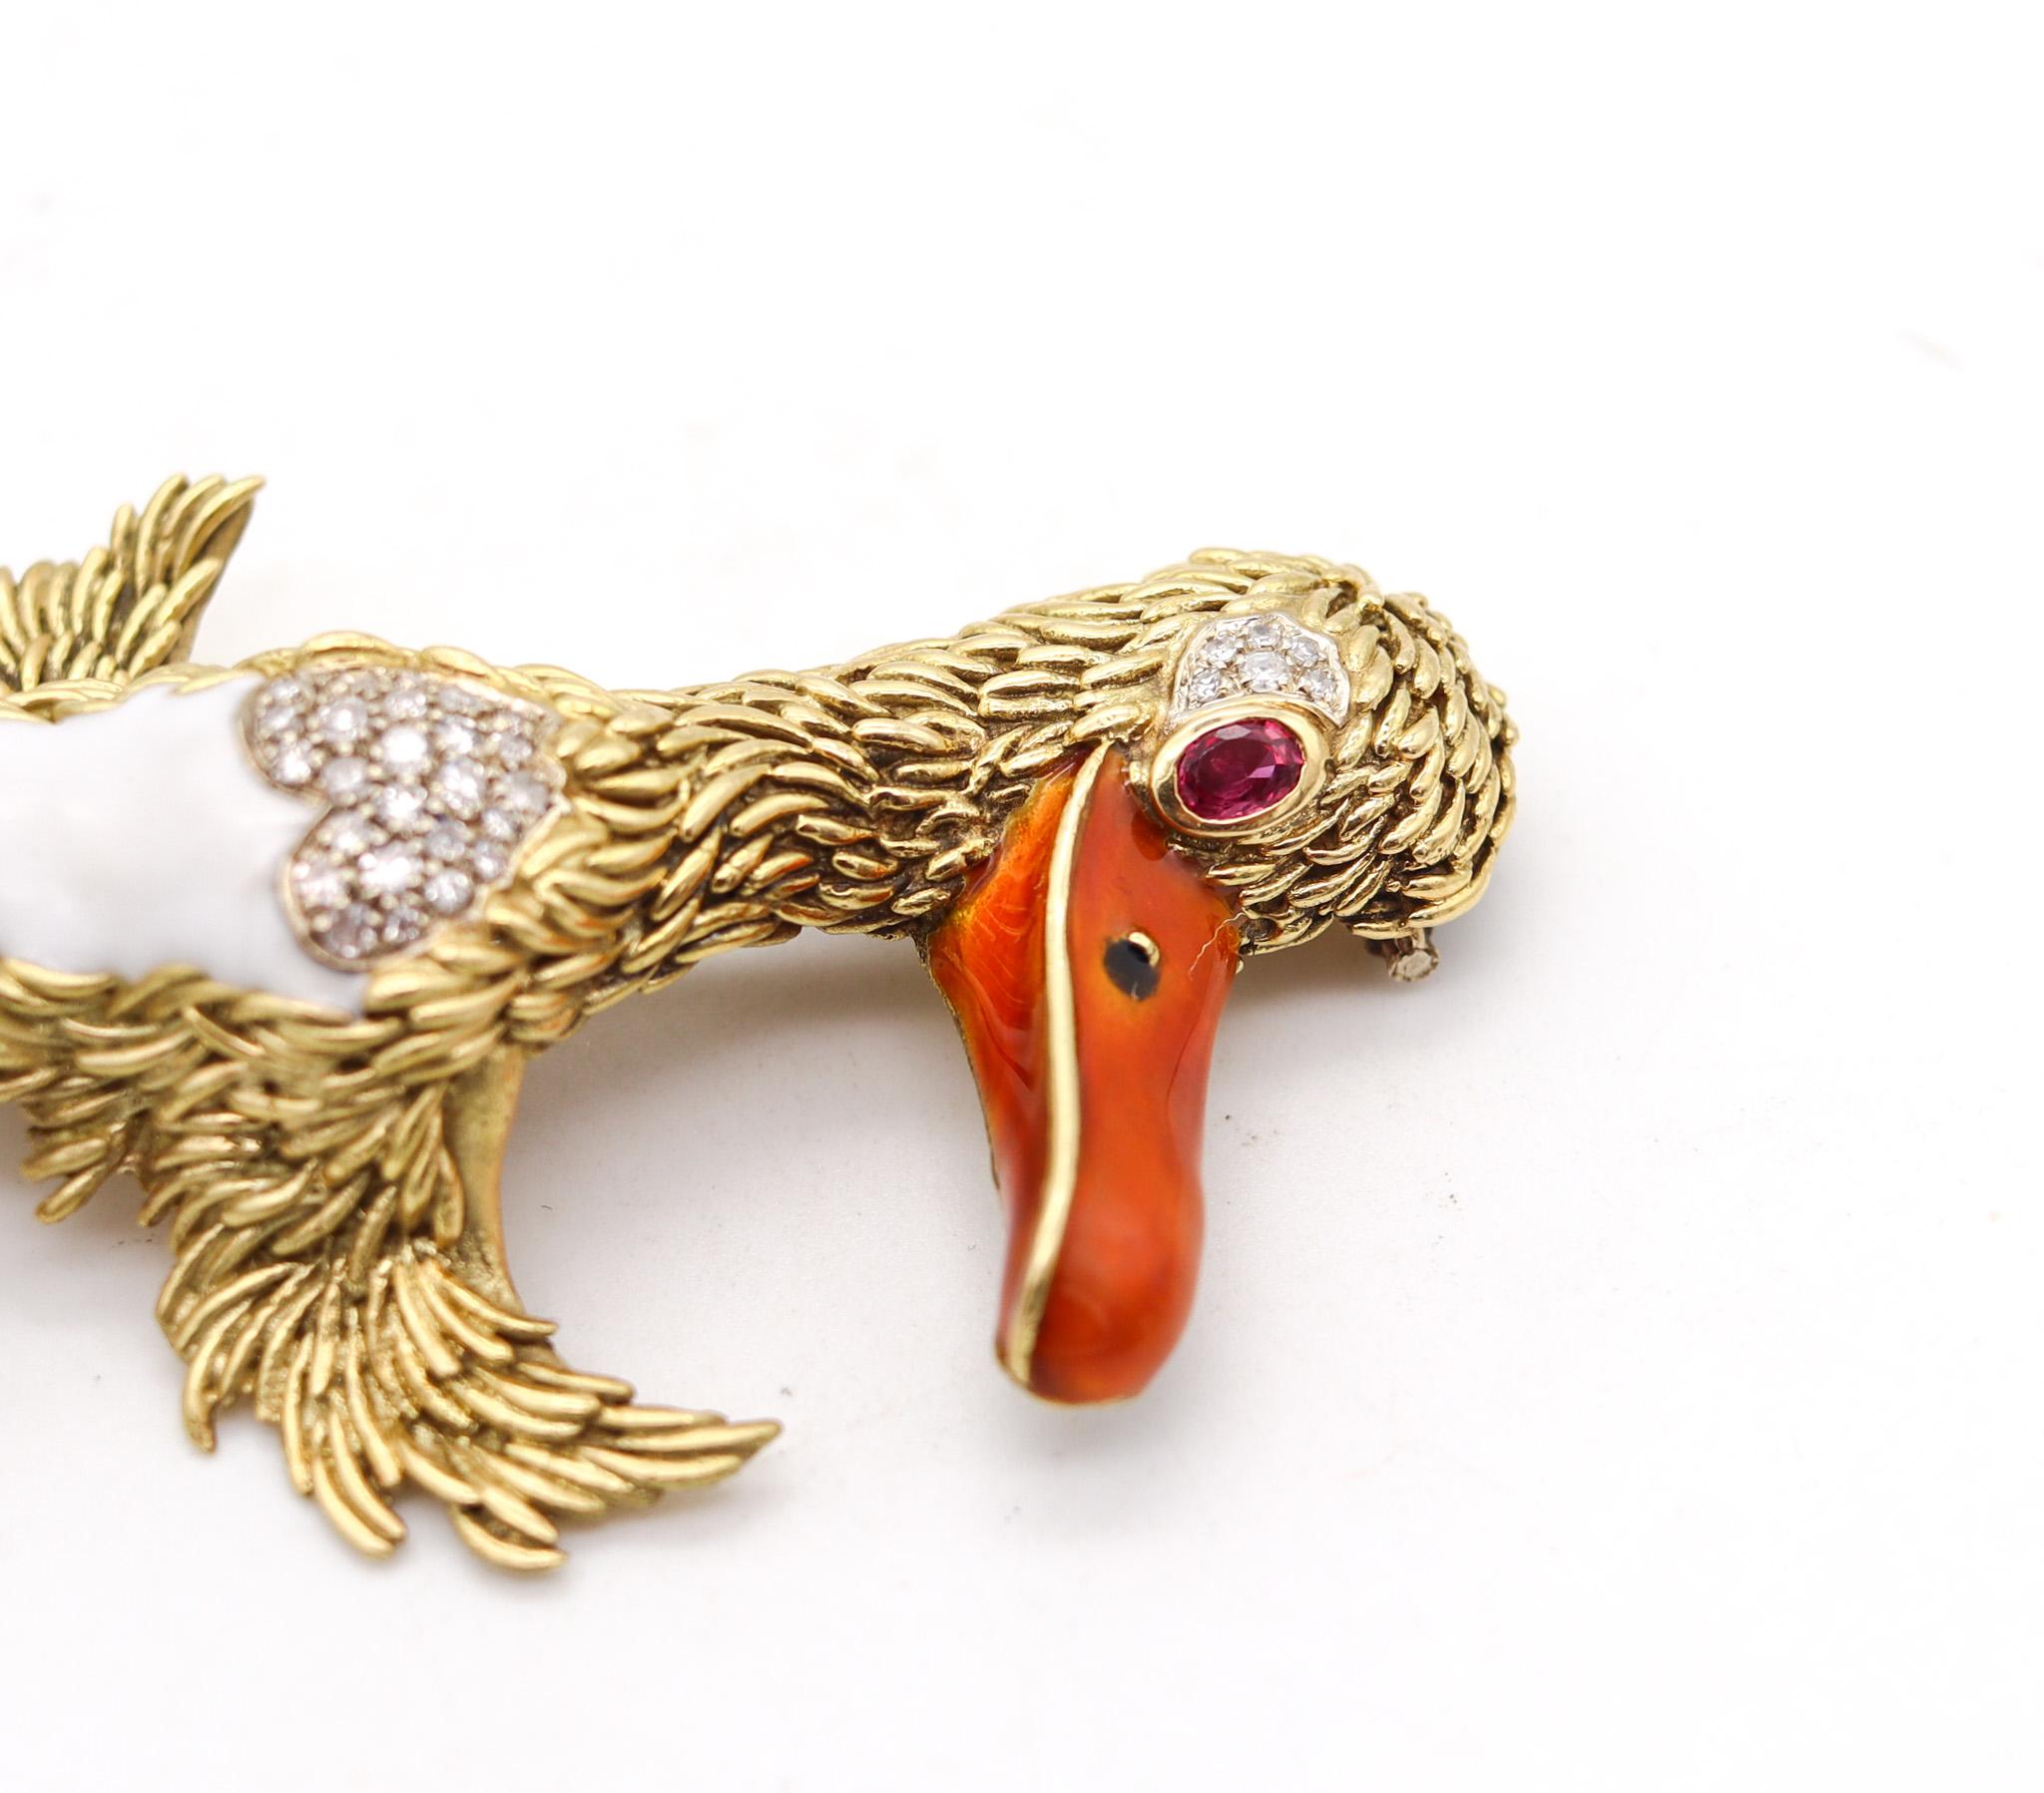 Modernist Frascarolo Milano Enameled Pelican Brooch 18Kt Yellow Gold With Diamonds & Ruby